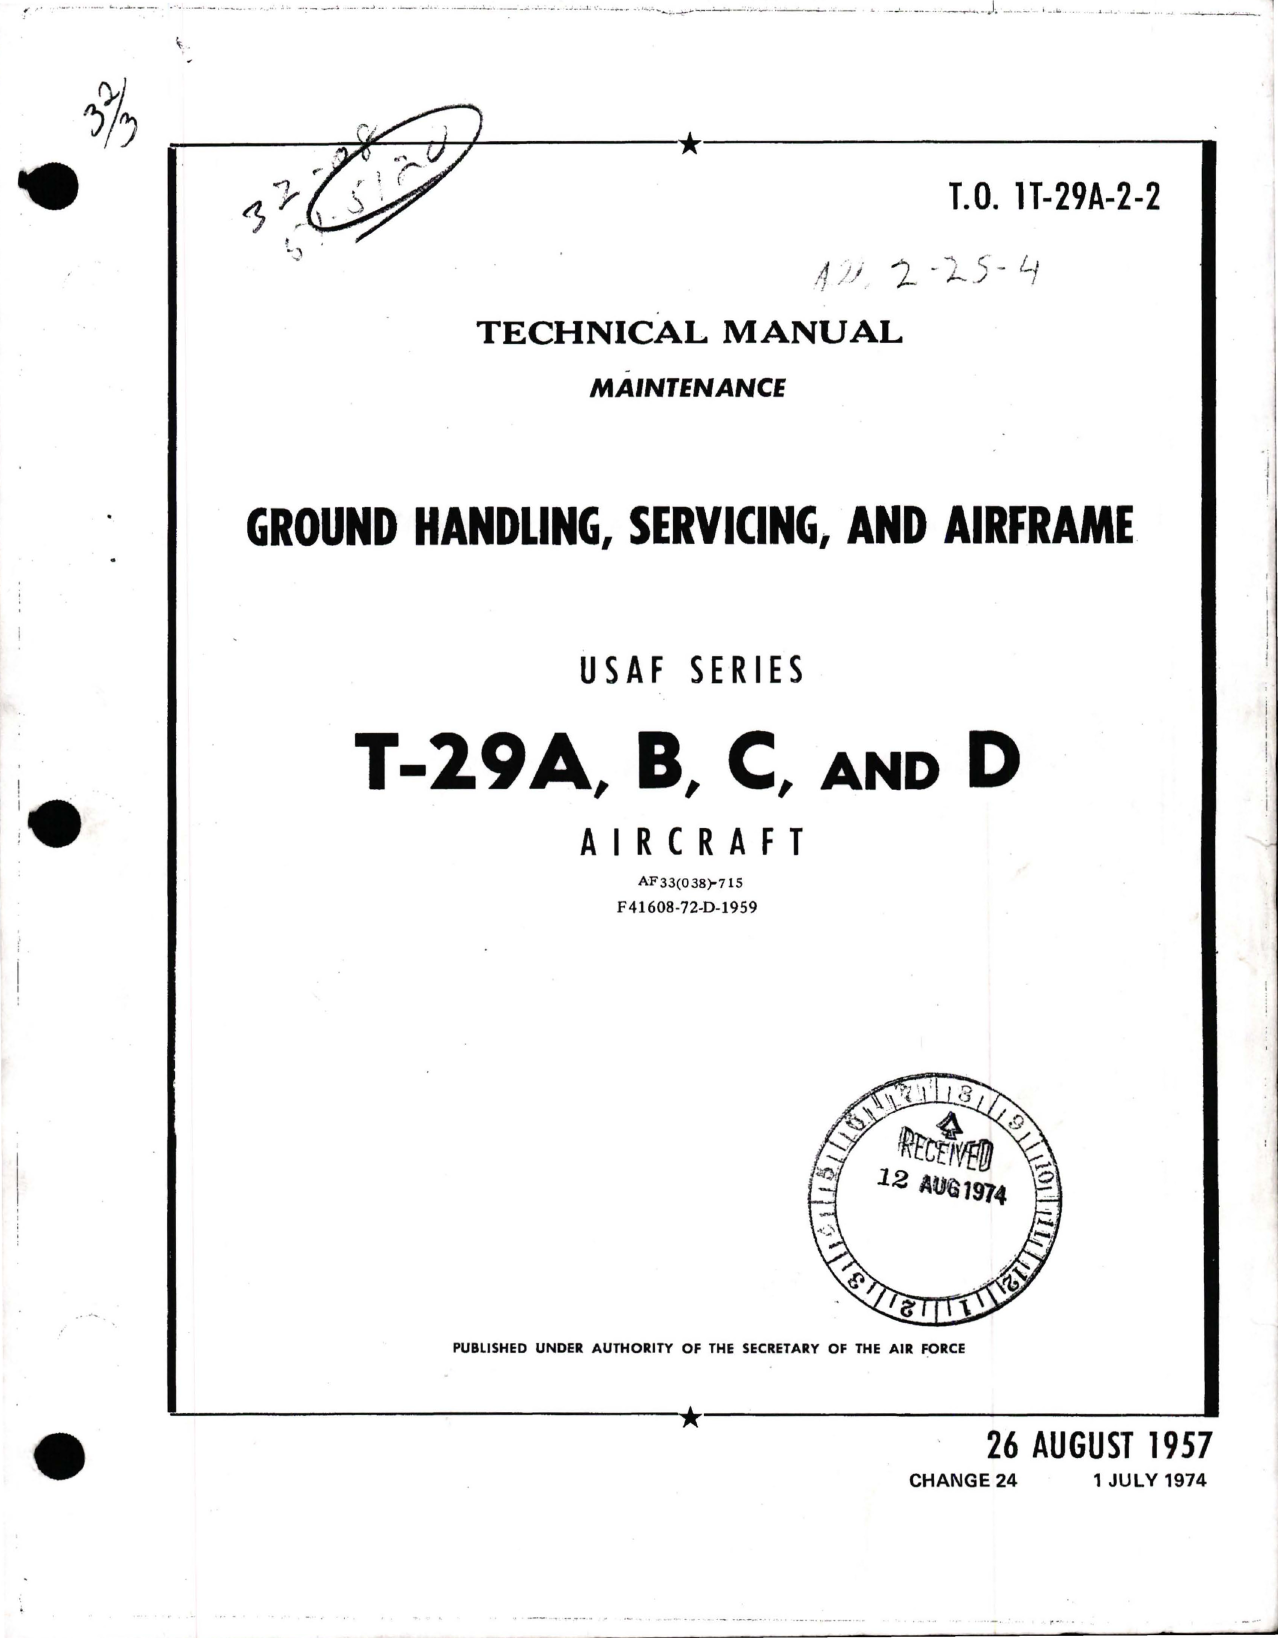 Sample page 1 from AirCorps Library document: Maintenance Manual for Ground Handling, Servicing and Airframe - T-29A, T-29B, T-29C and T-29D